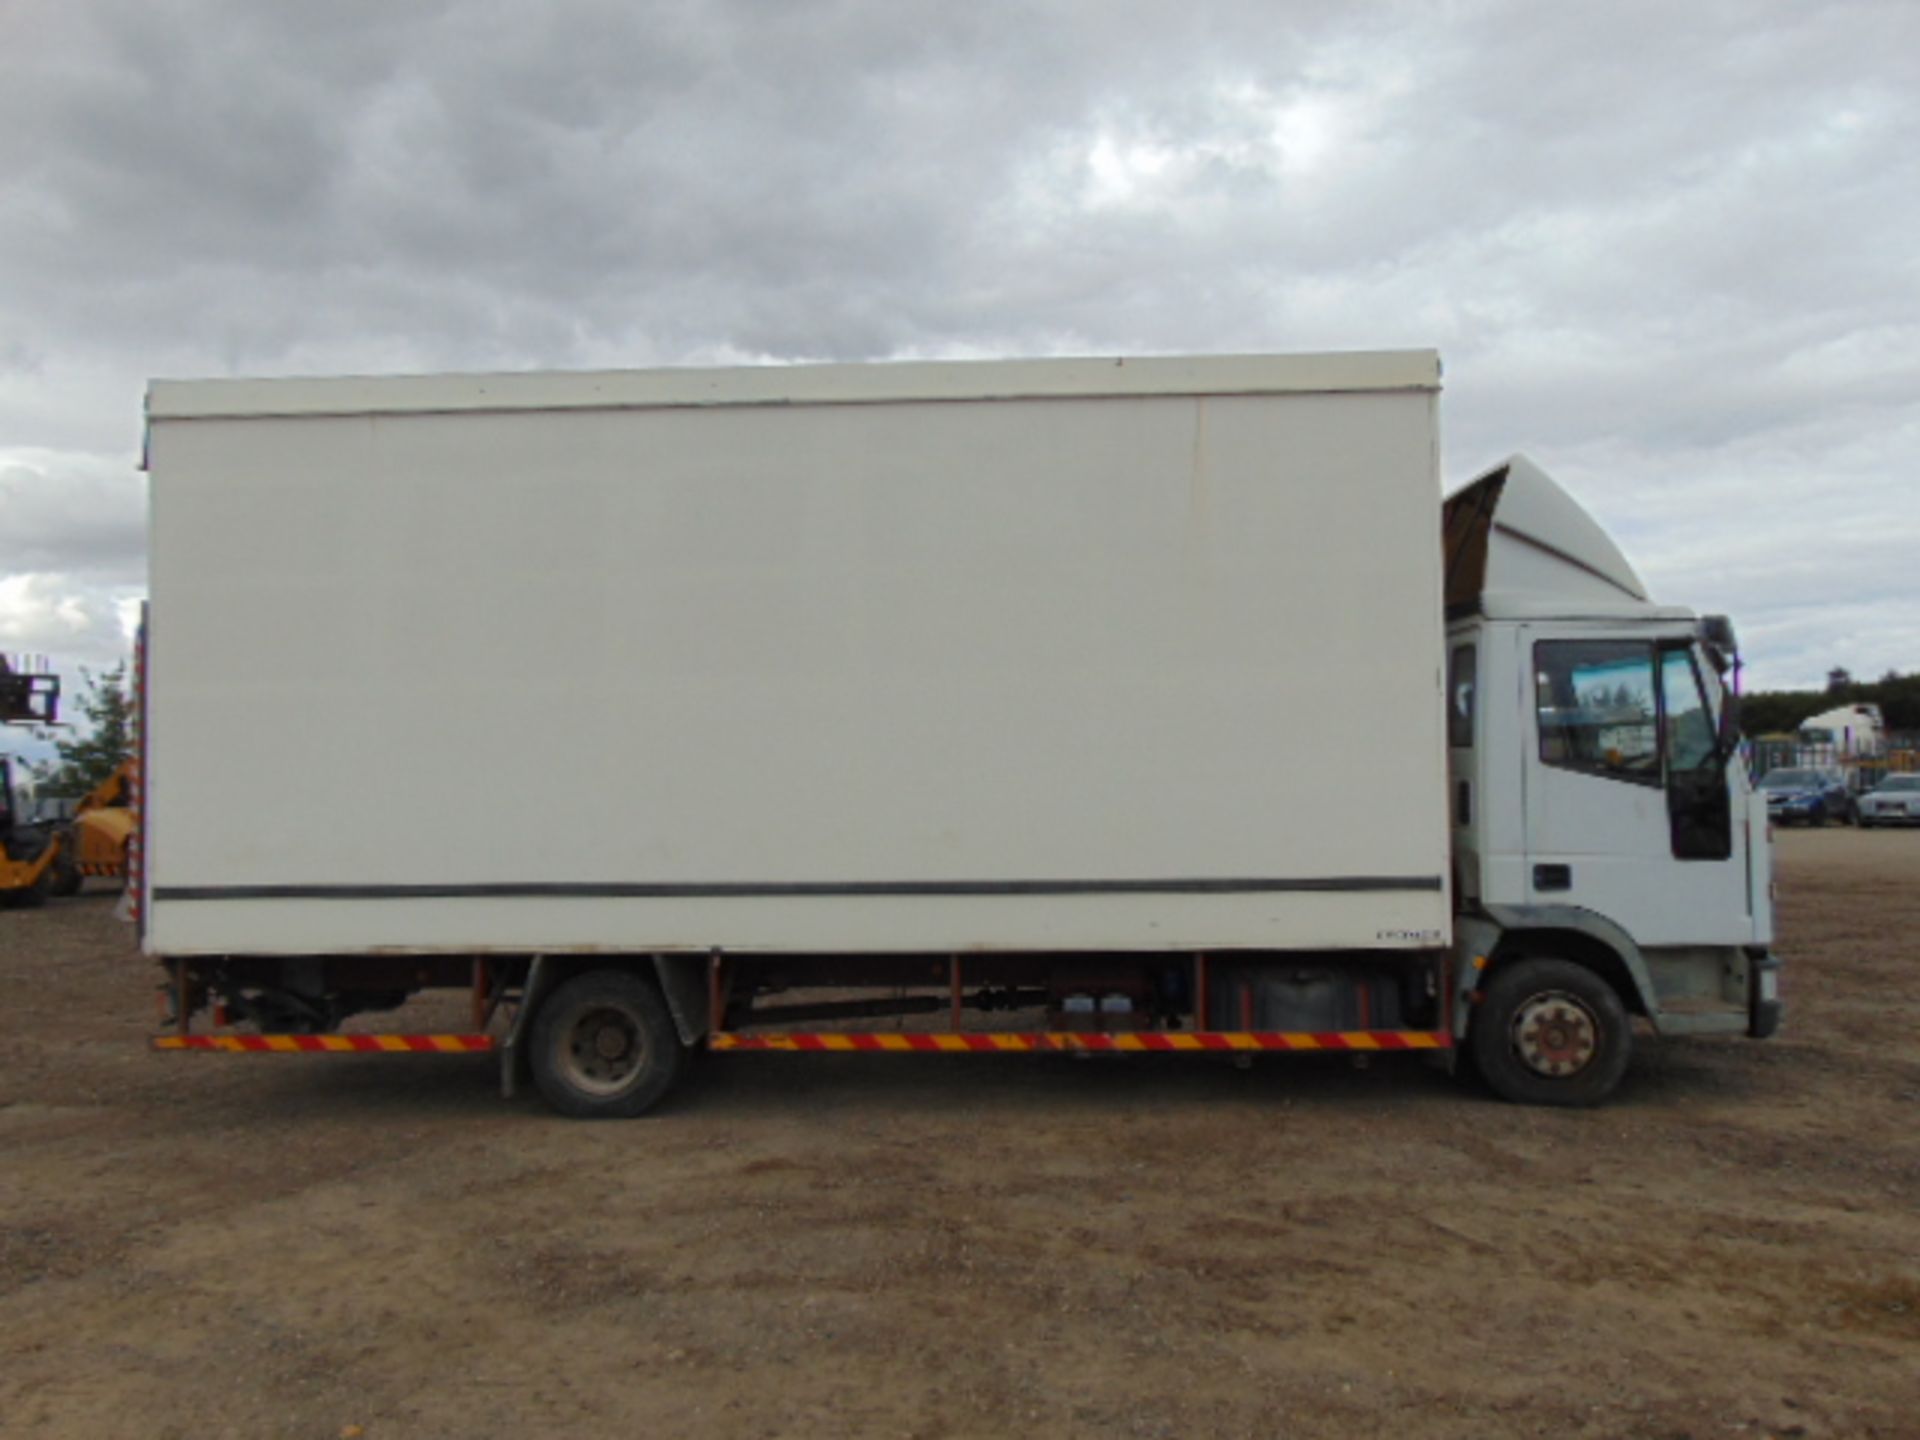 Ford Iveco Cargo 100E18 6T Box Lorry Complete with Rear Tail Lift - Image 5 of 20